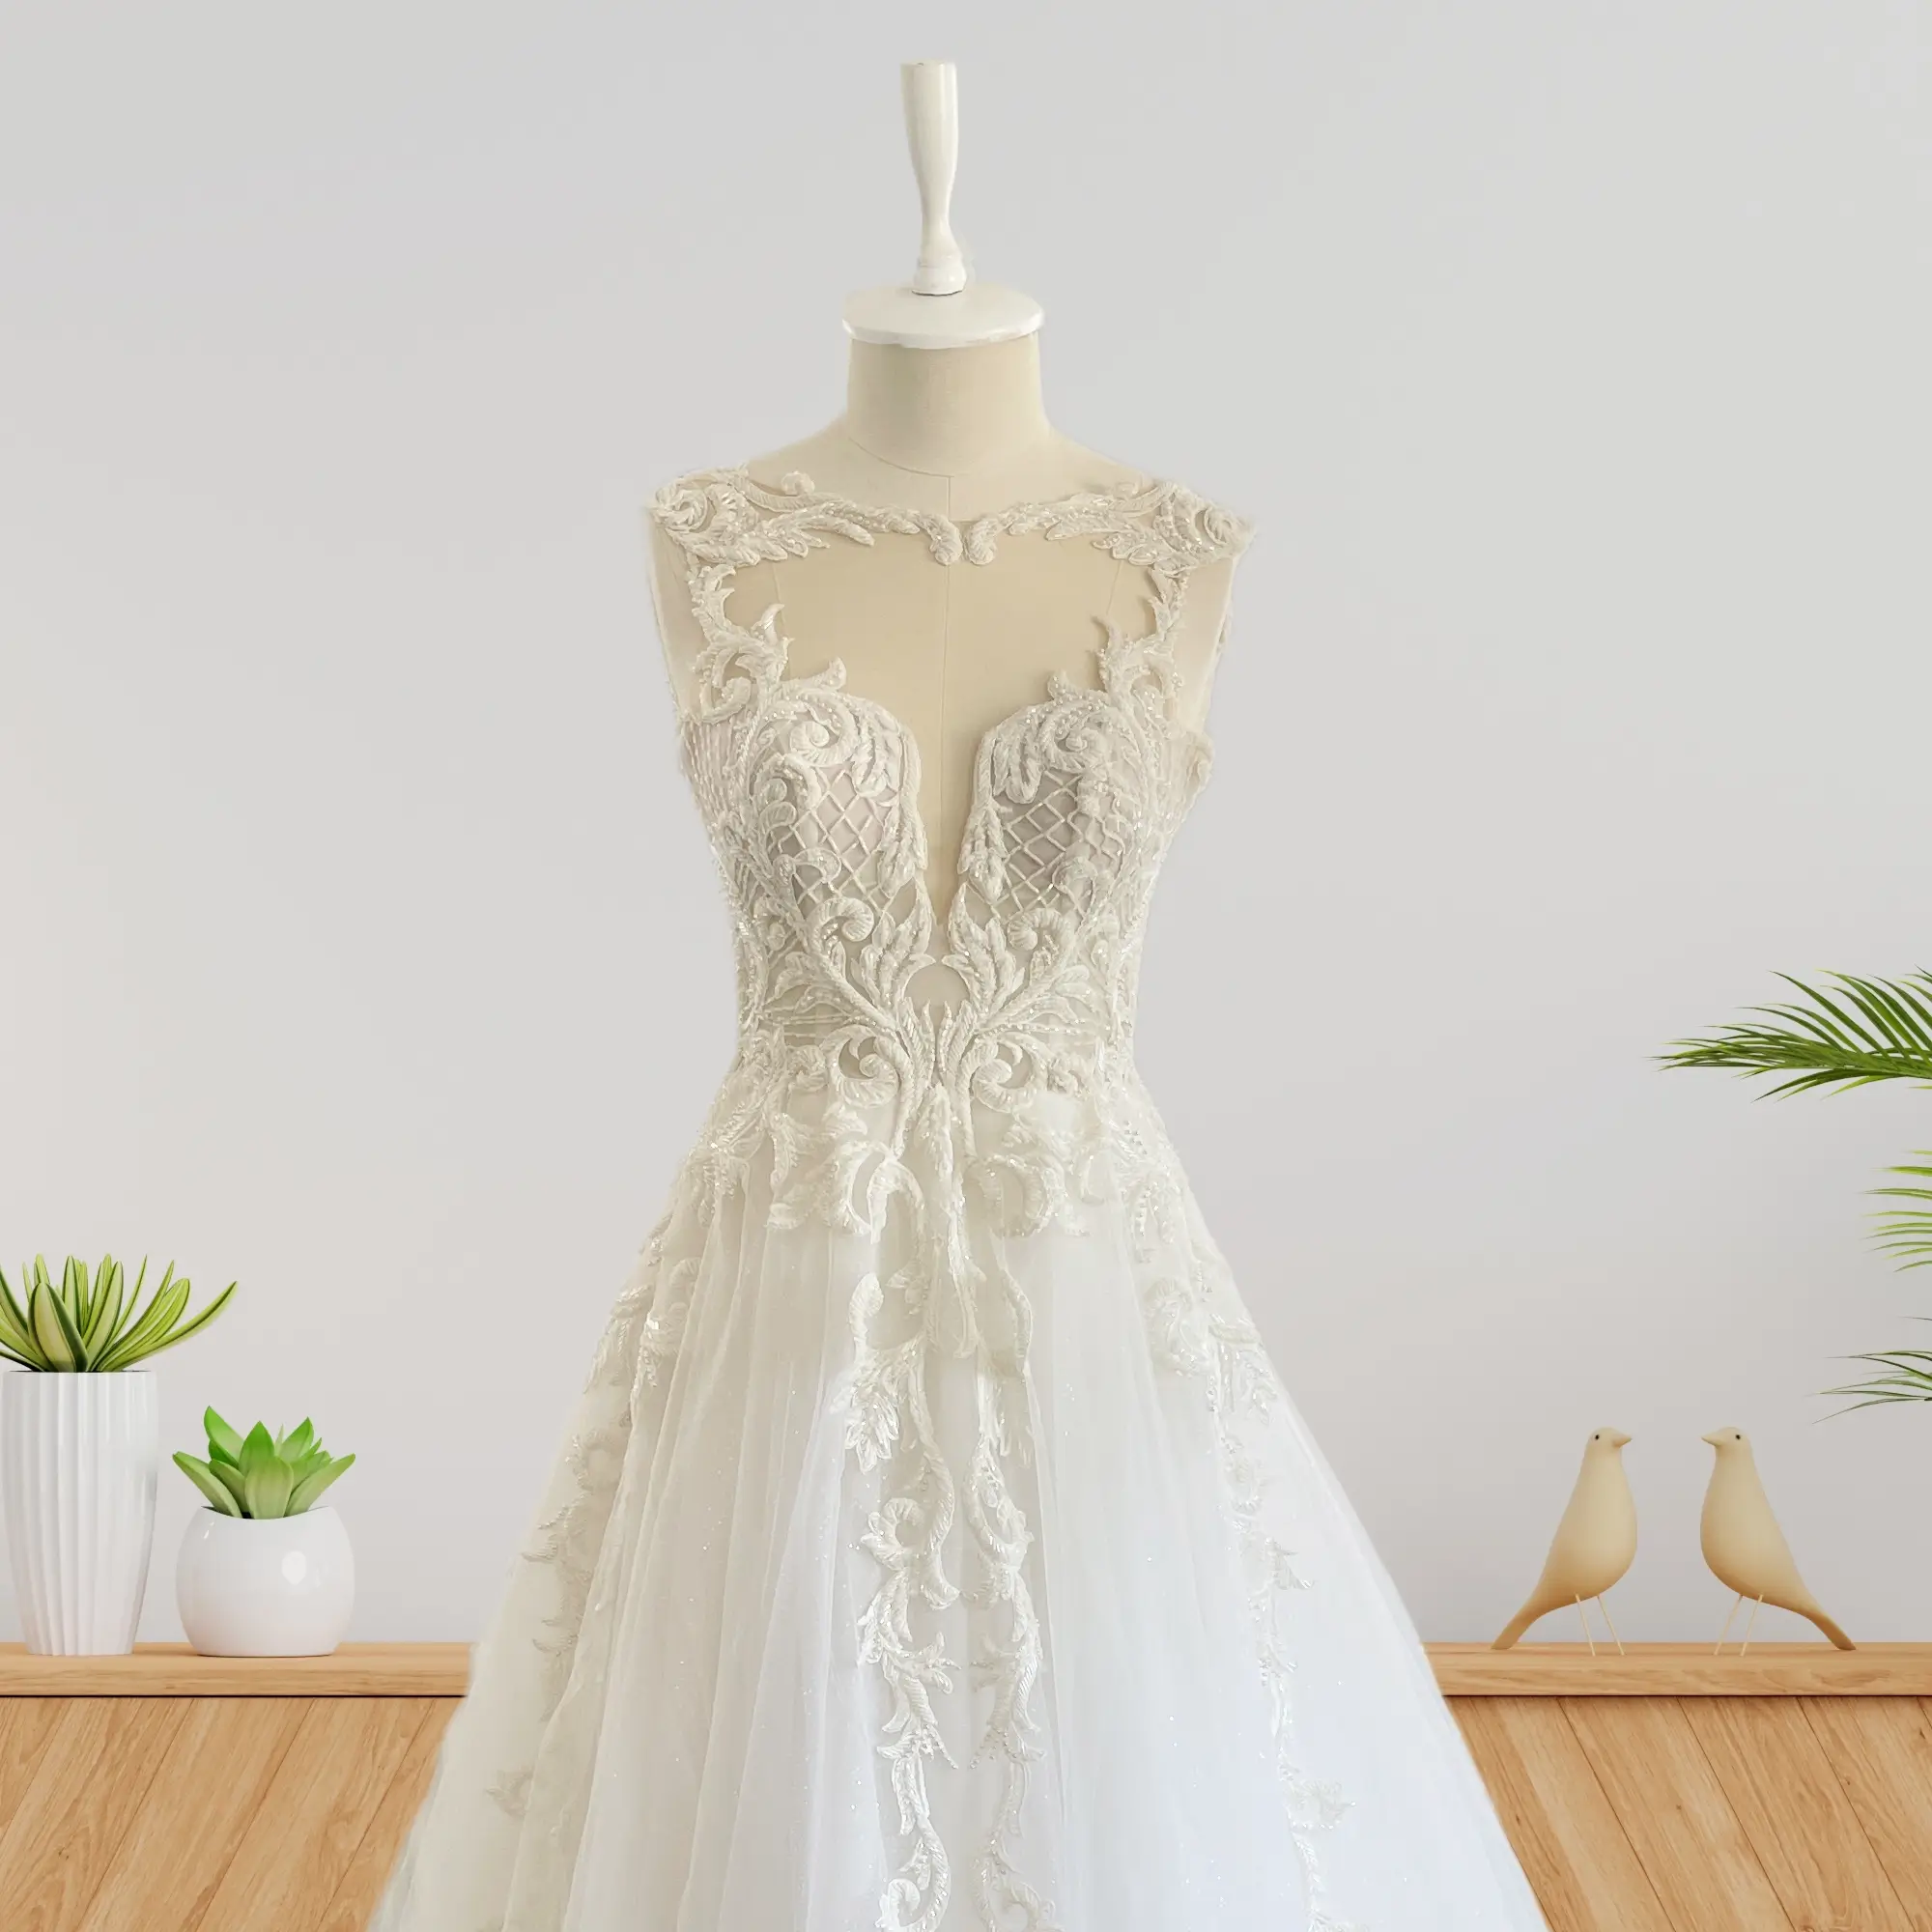 Handmade Bridal Gown with Delicate Lace and Tulle Features (Wedding Dress /  Bridal) – London Bridal